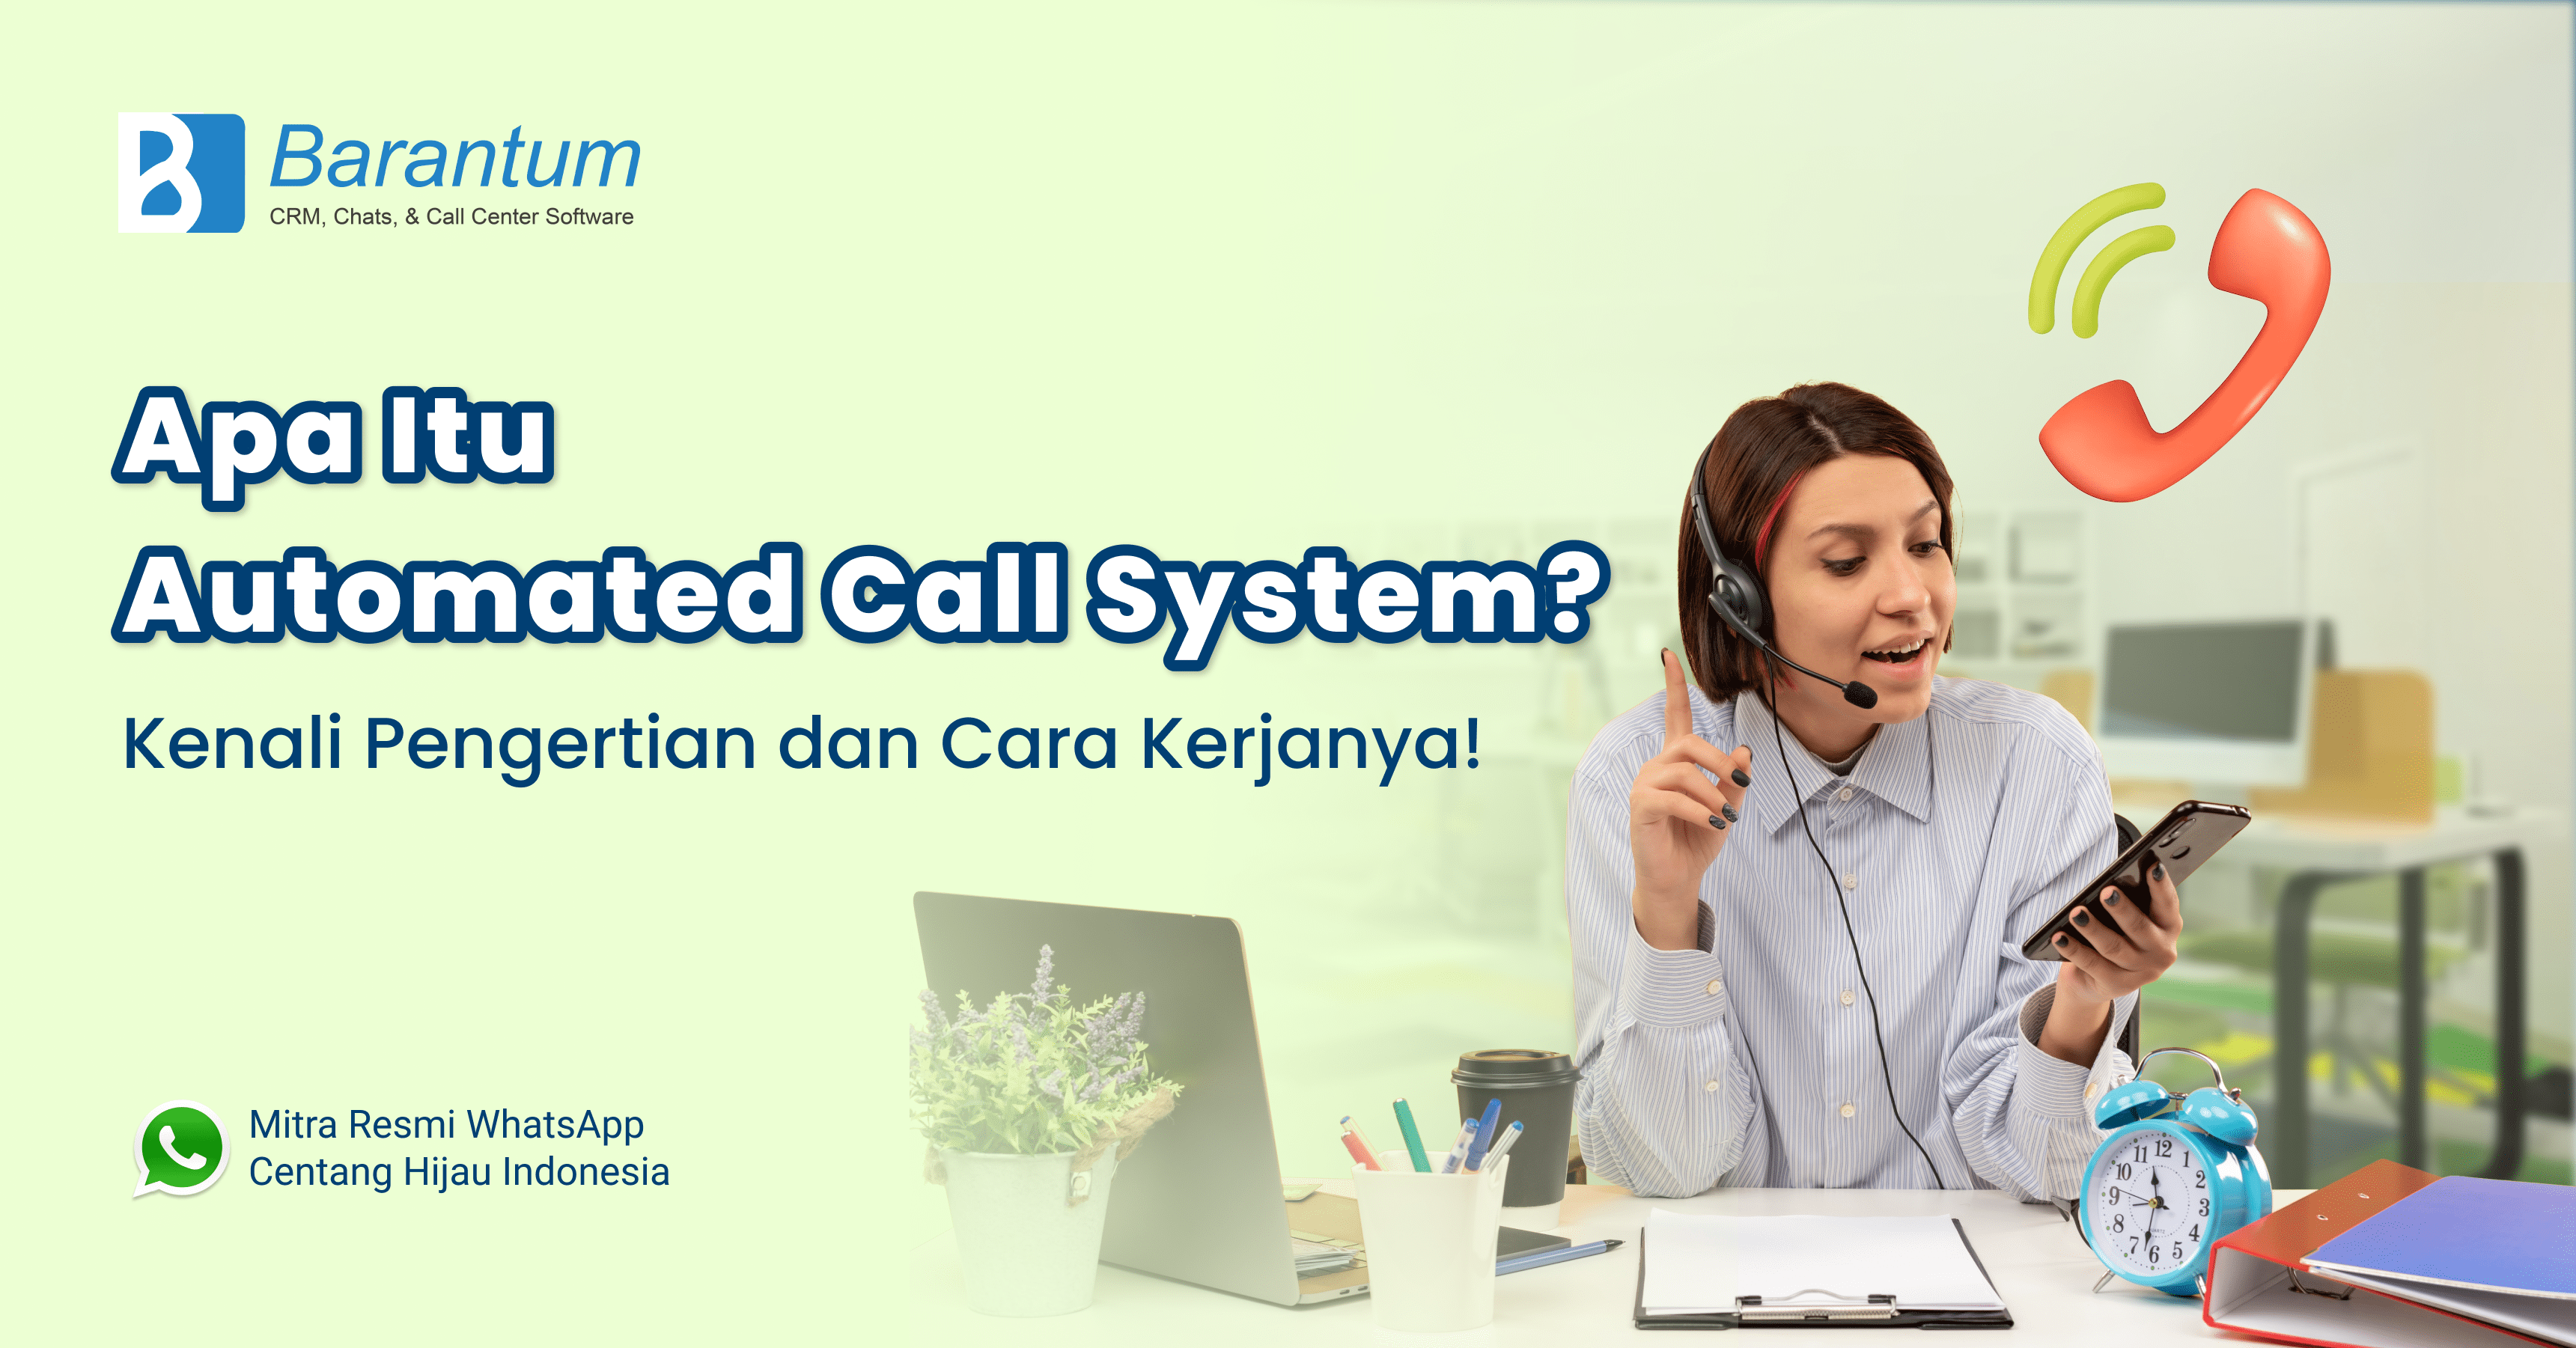 Automated Call System